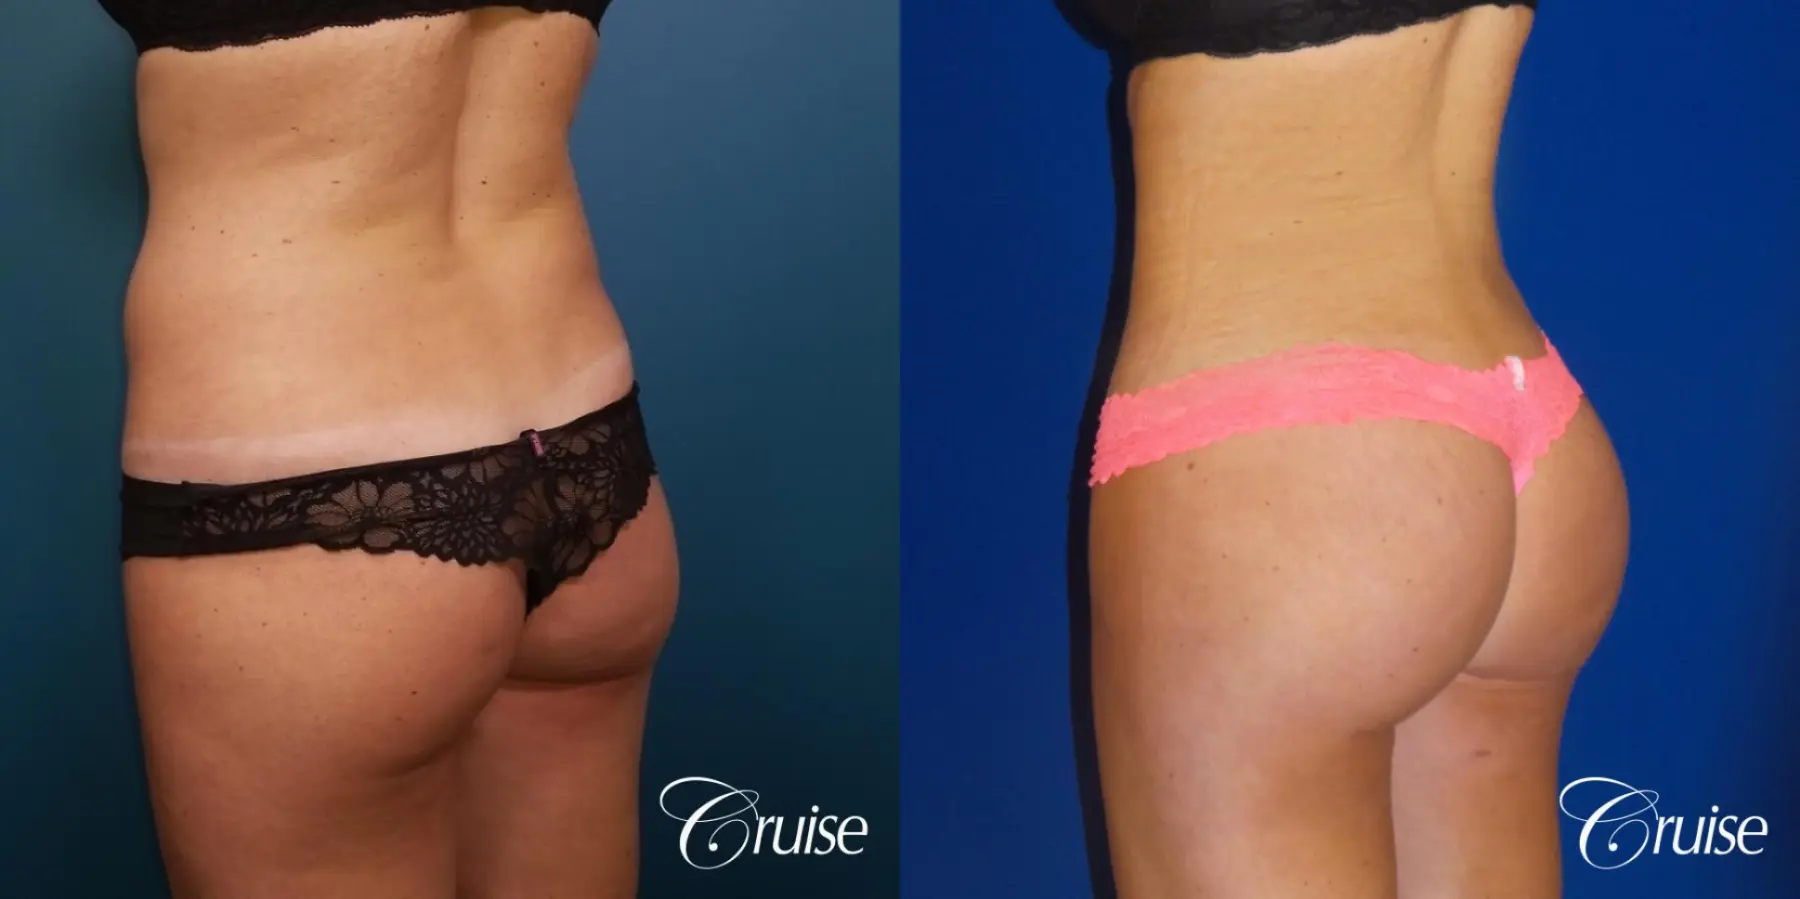 Brazilian Butt Lift: Patient 4 - Before and After 3